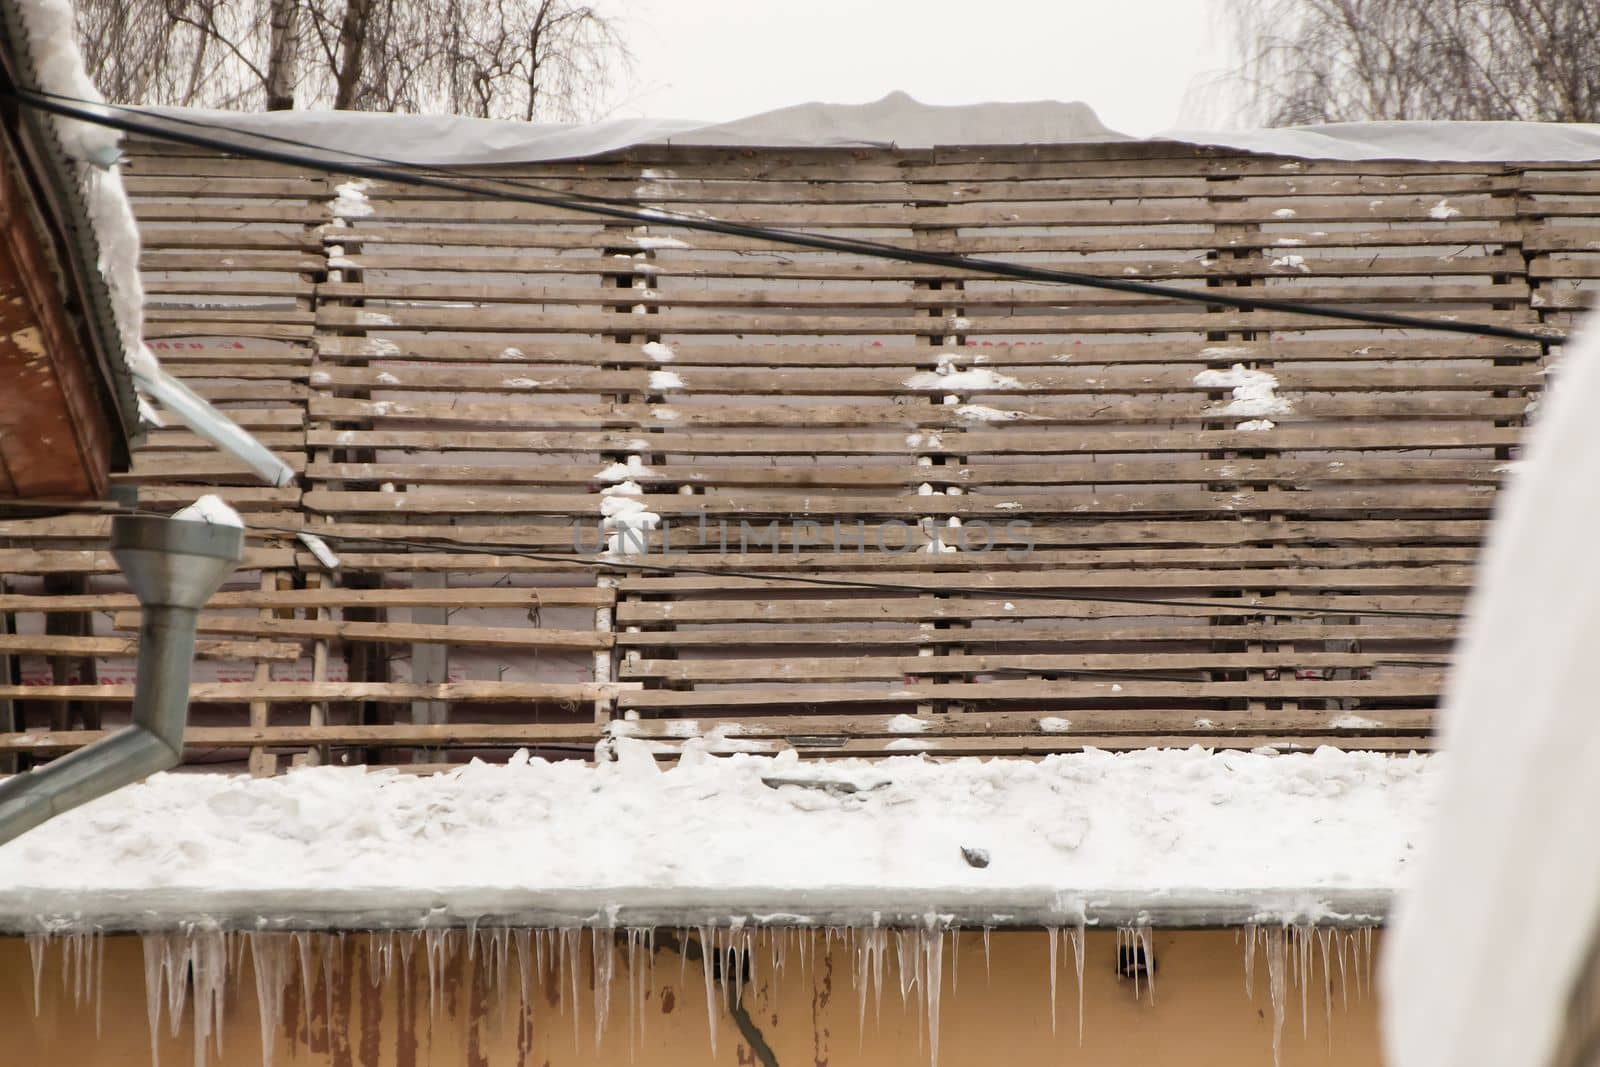 A dismantled roof with a wooden crate and hanging icicles on the edge. by anarni33